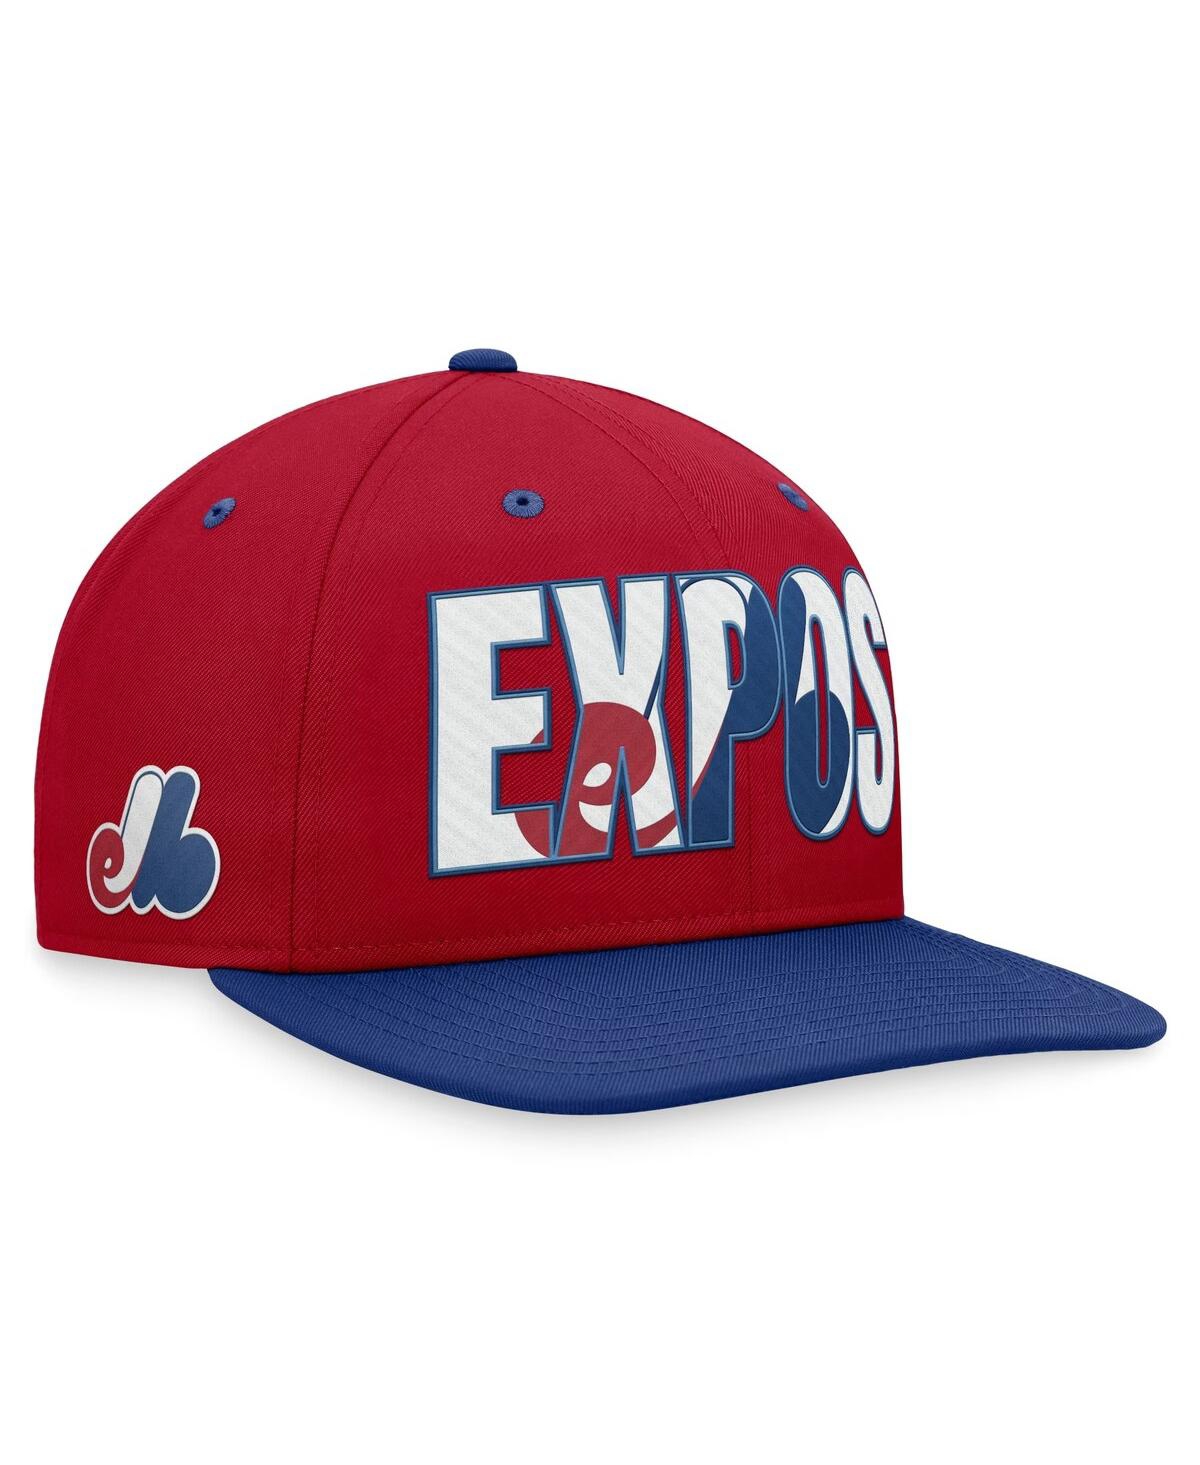 Nike Men's  Red Montreal Expos Cooperstown Collection Pro Snapback Hat